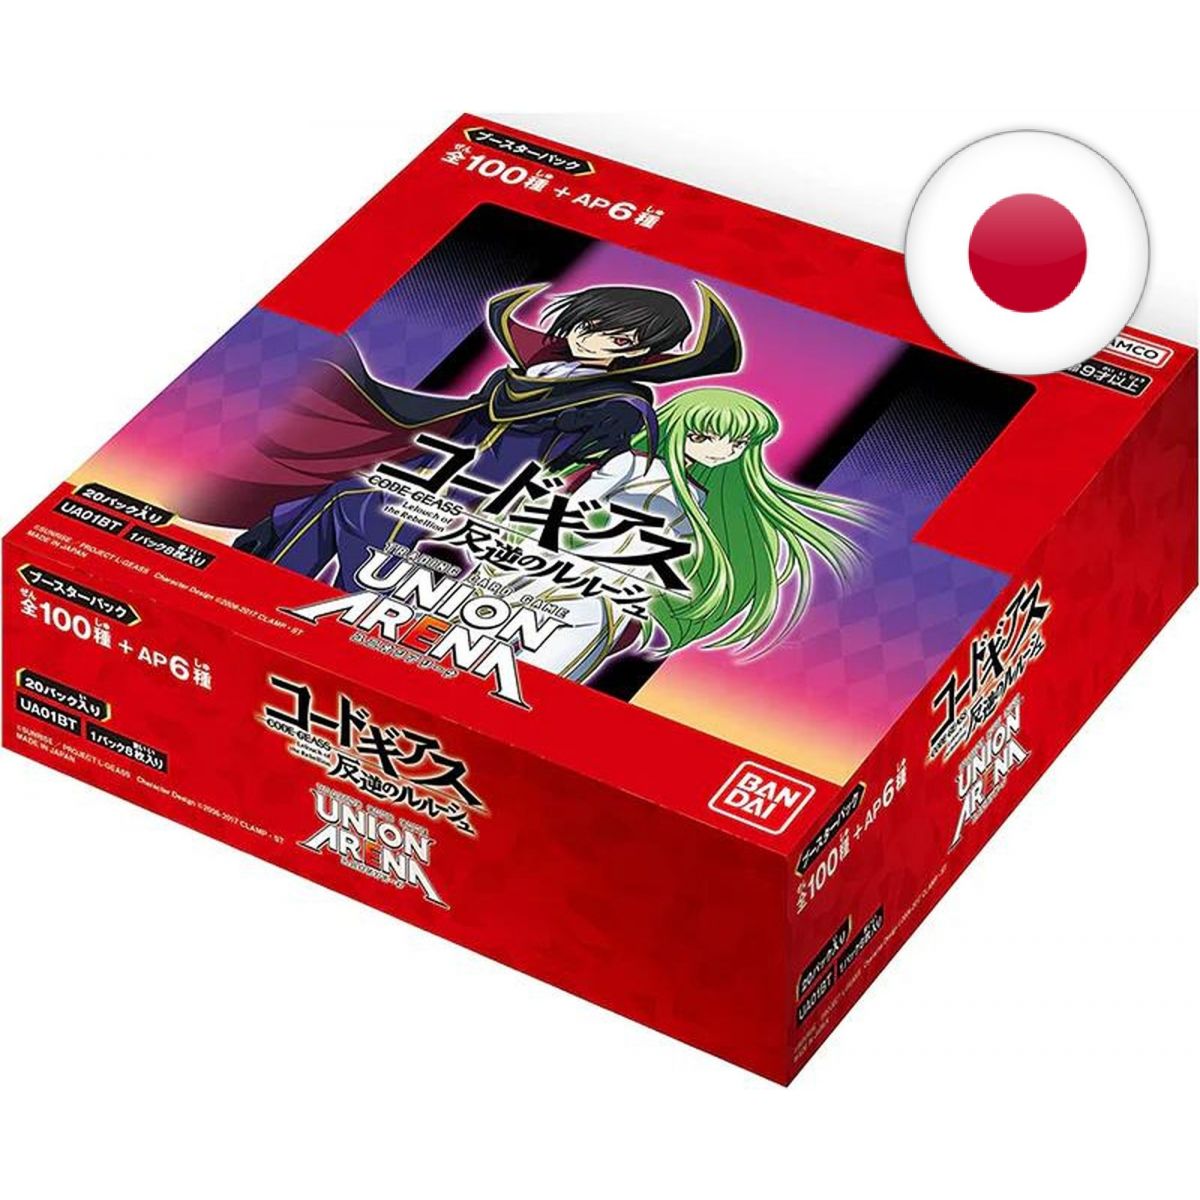 Item Union Arena – Display – Box mit 20 Boostern – Code Geass Lelouch of the Rebellion – JP